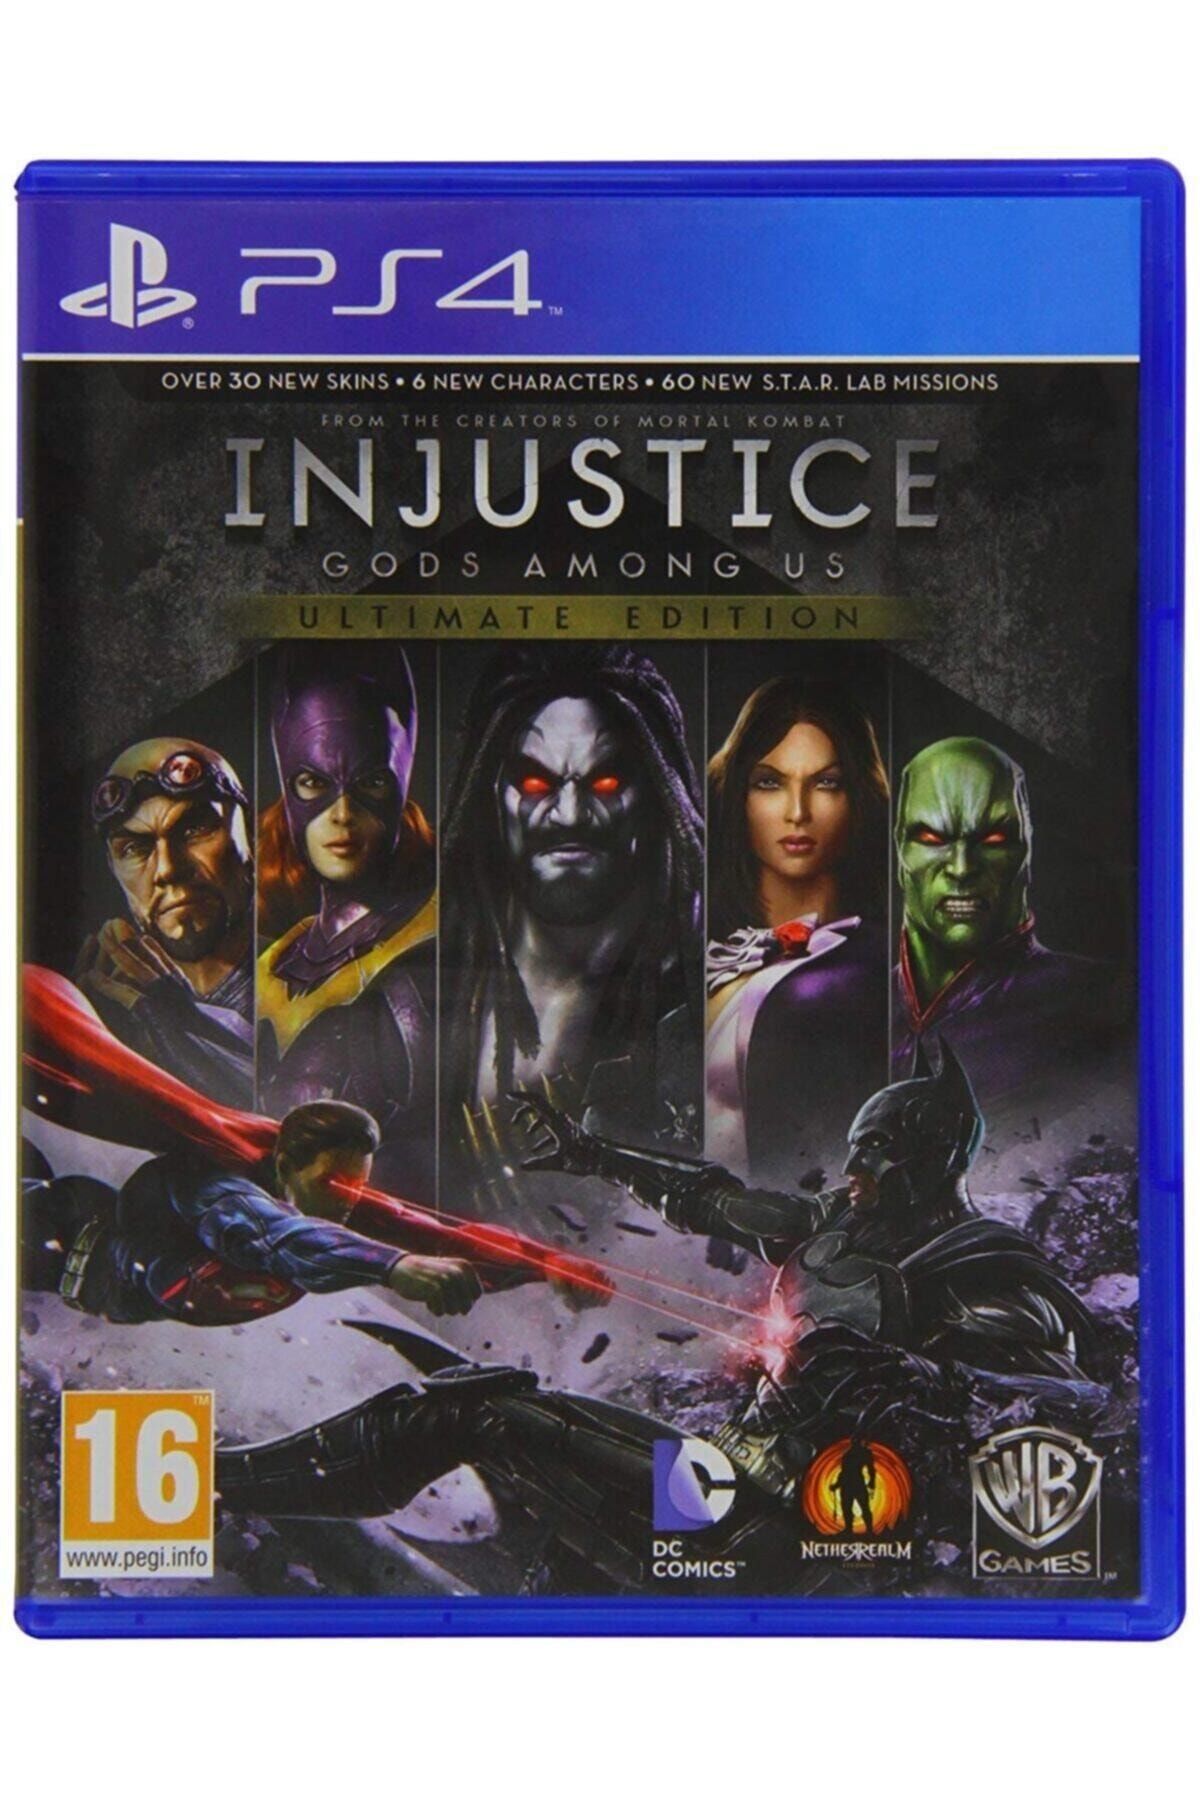 Ps4 ultimate edition. Injustice Ultimate Edition ps4. Injustice Gods among us плейстейшен 4. Injustice: Gods among us Ultimate Edition диск ps4. Диск амонг АС на пс4.